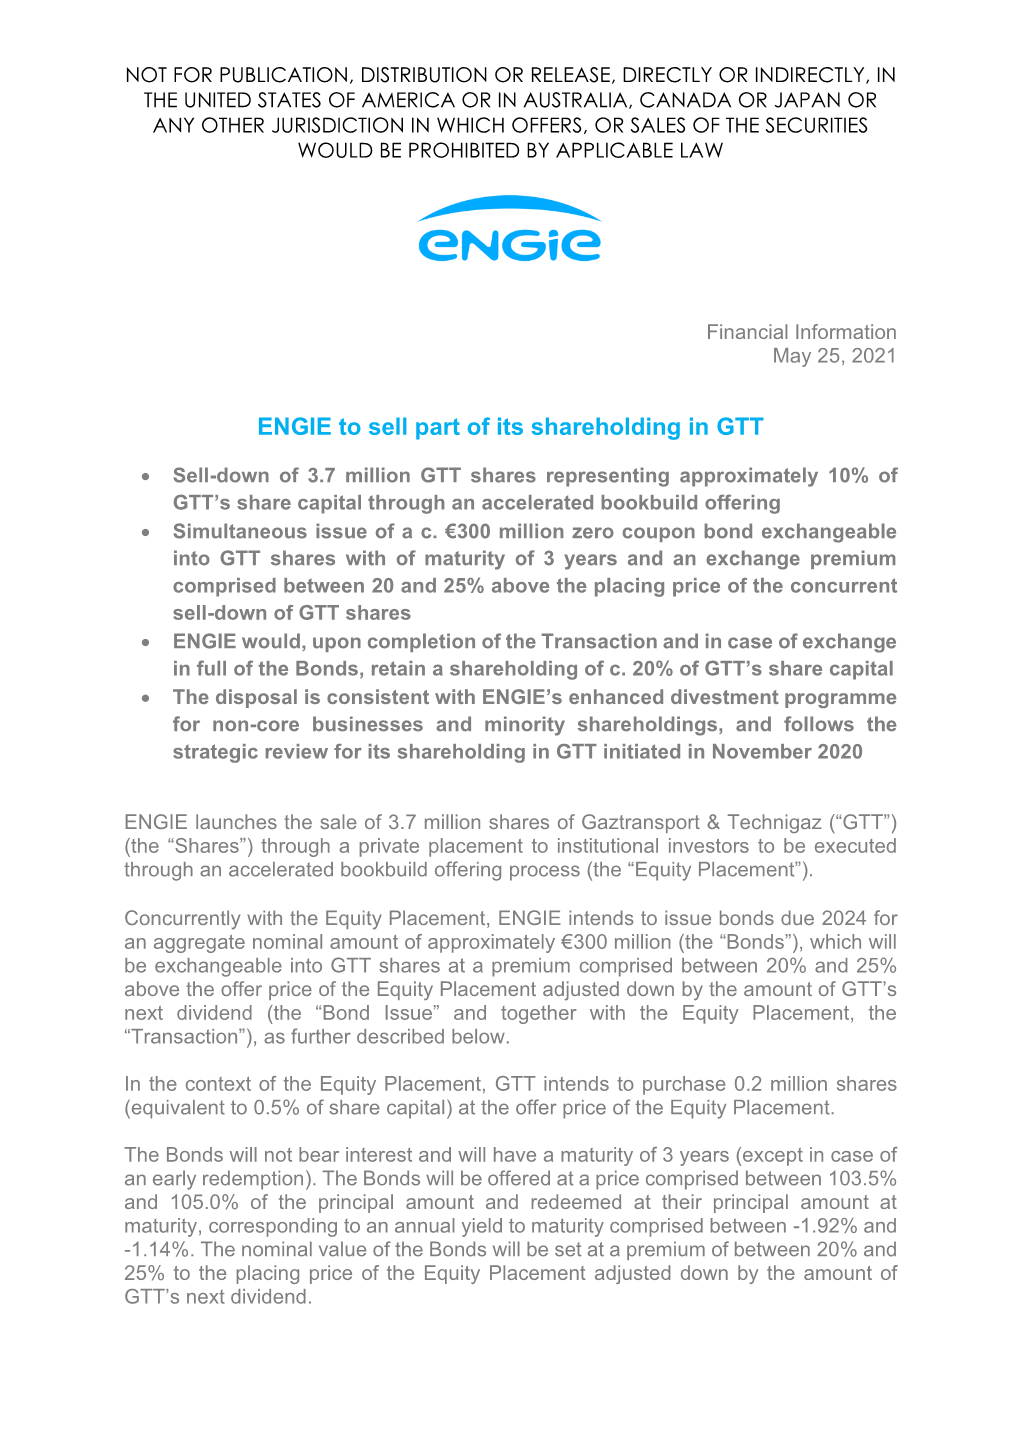 ENGIE to Sell Part of Its Shareholding in GTT